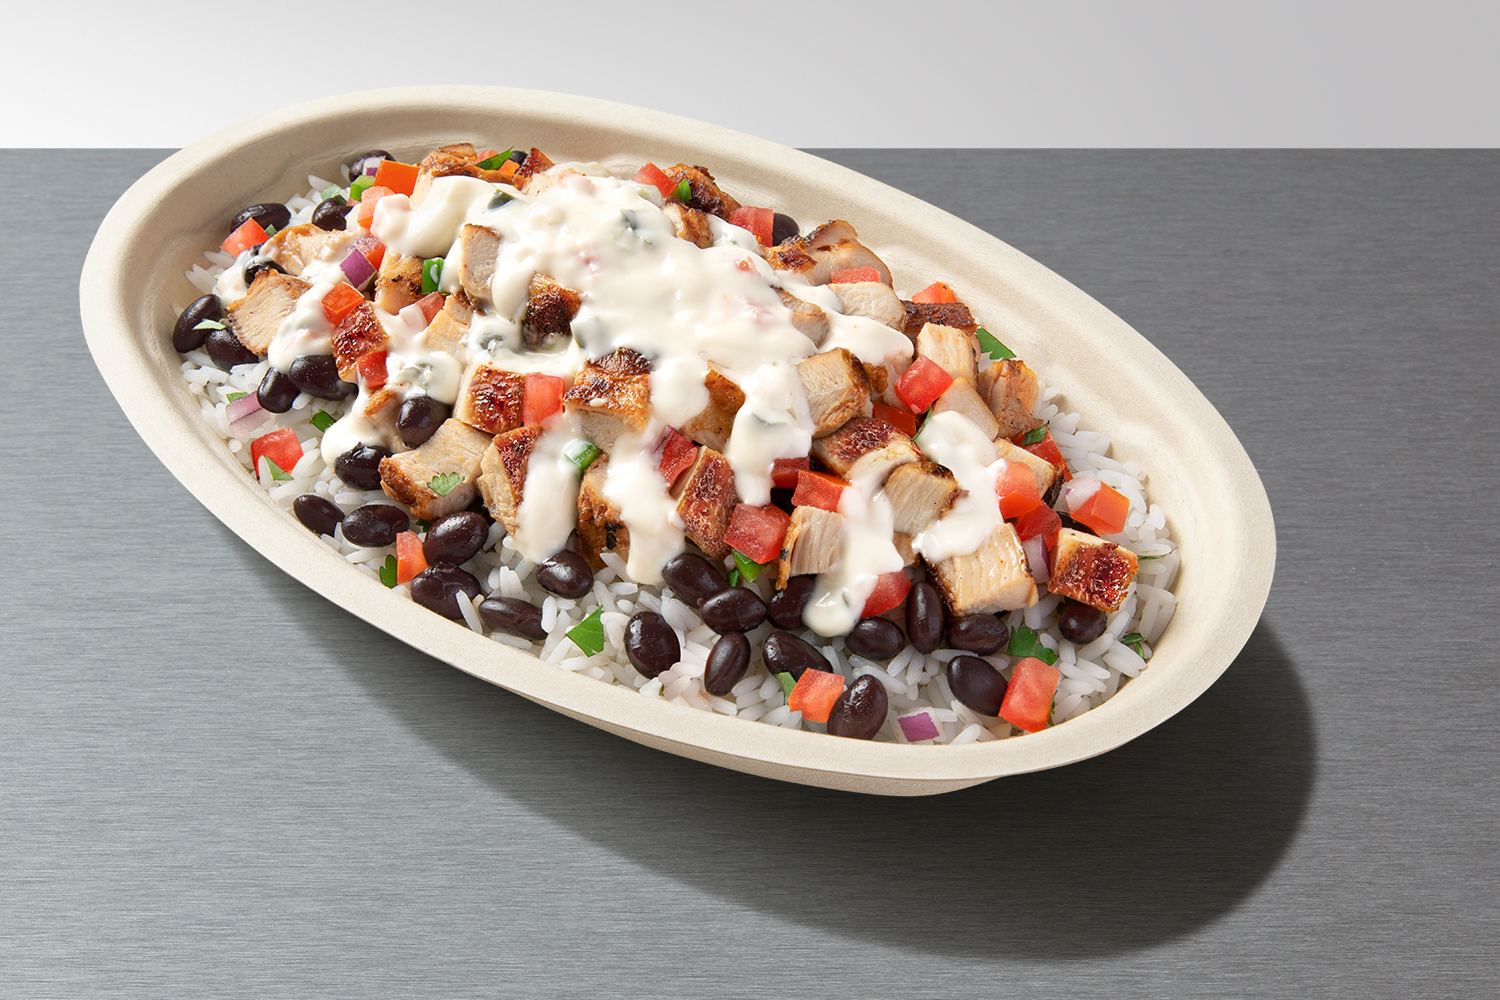 CHIPOTLE ADDS CHICKEN AL PASTOR TO MENUS IN THE U.S., CANADA, AND